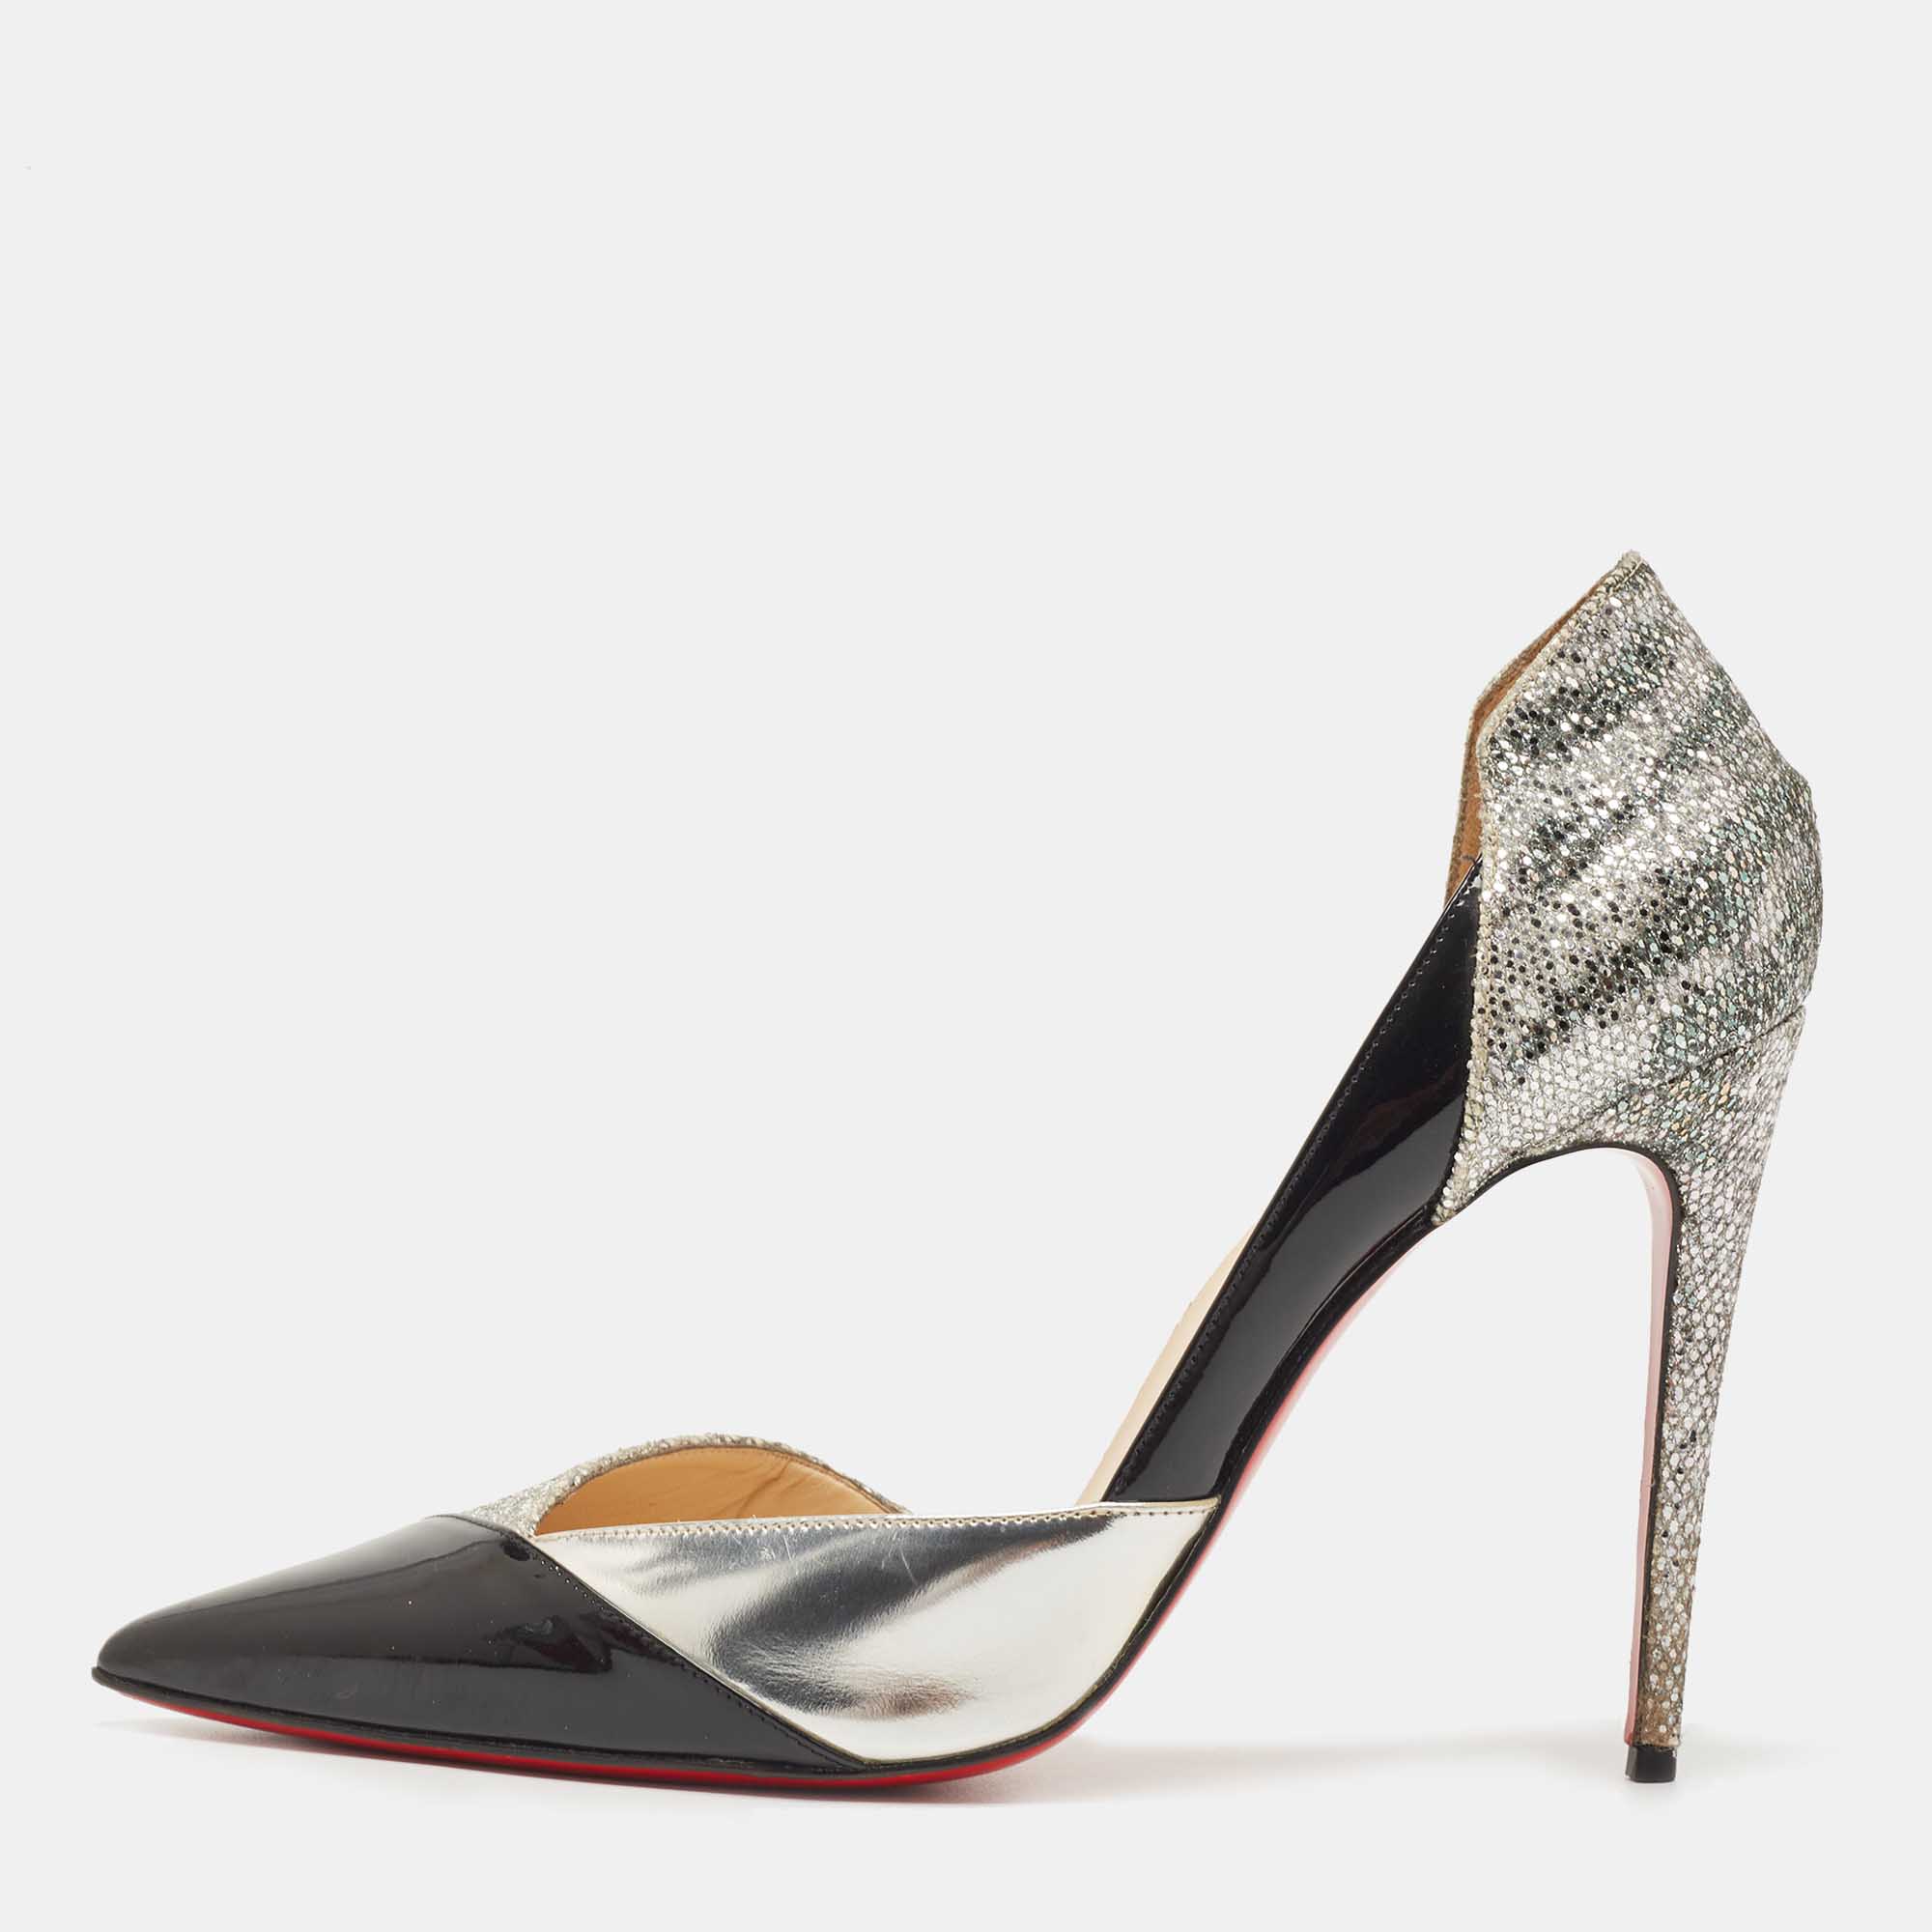 Christian louboutin silver/black patent and glitter tac clac pumps size 38.5